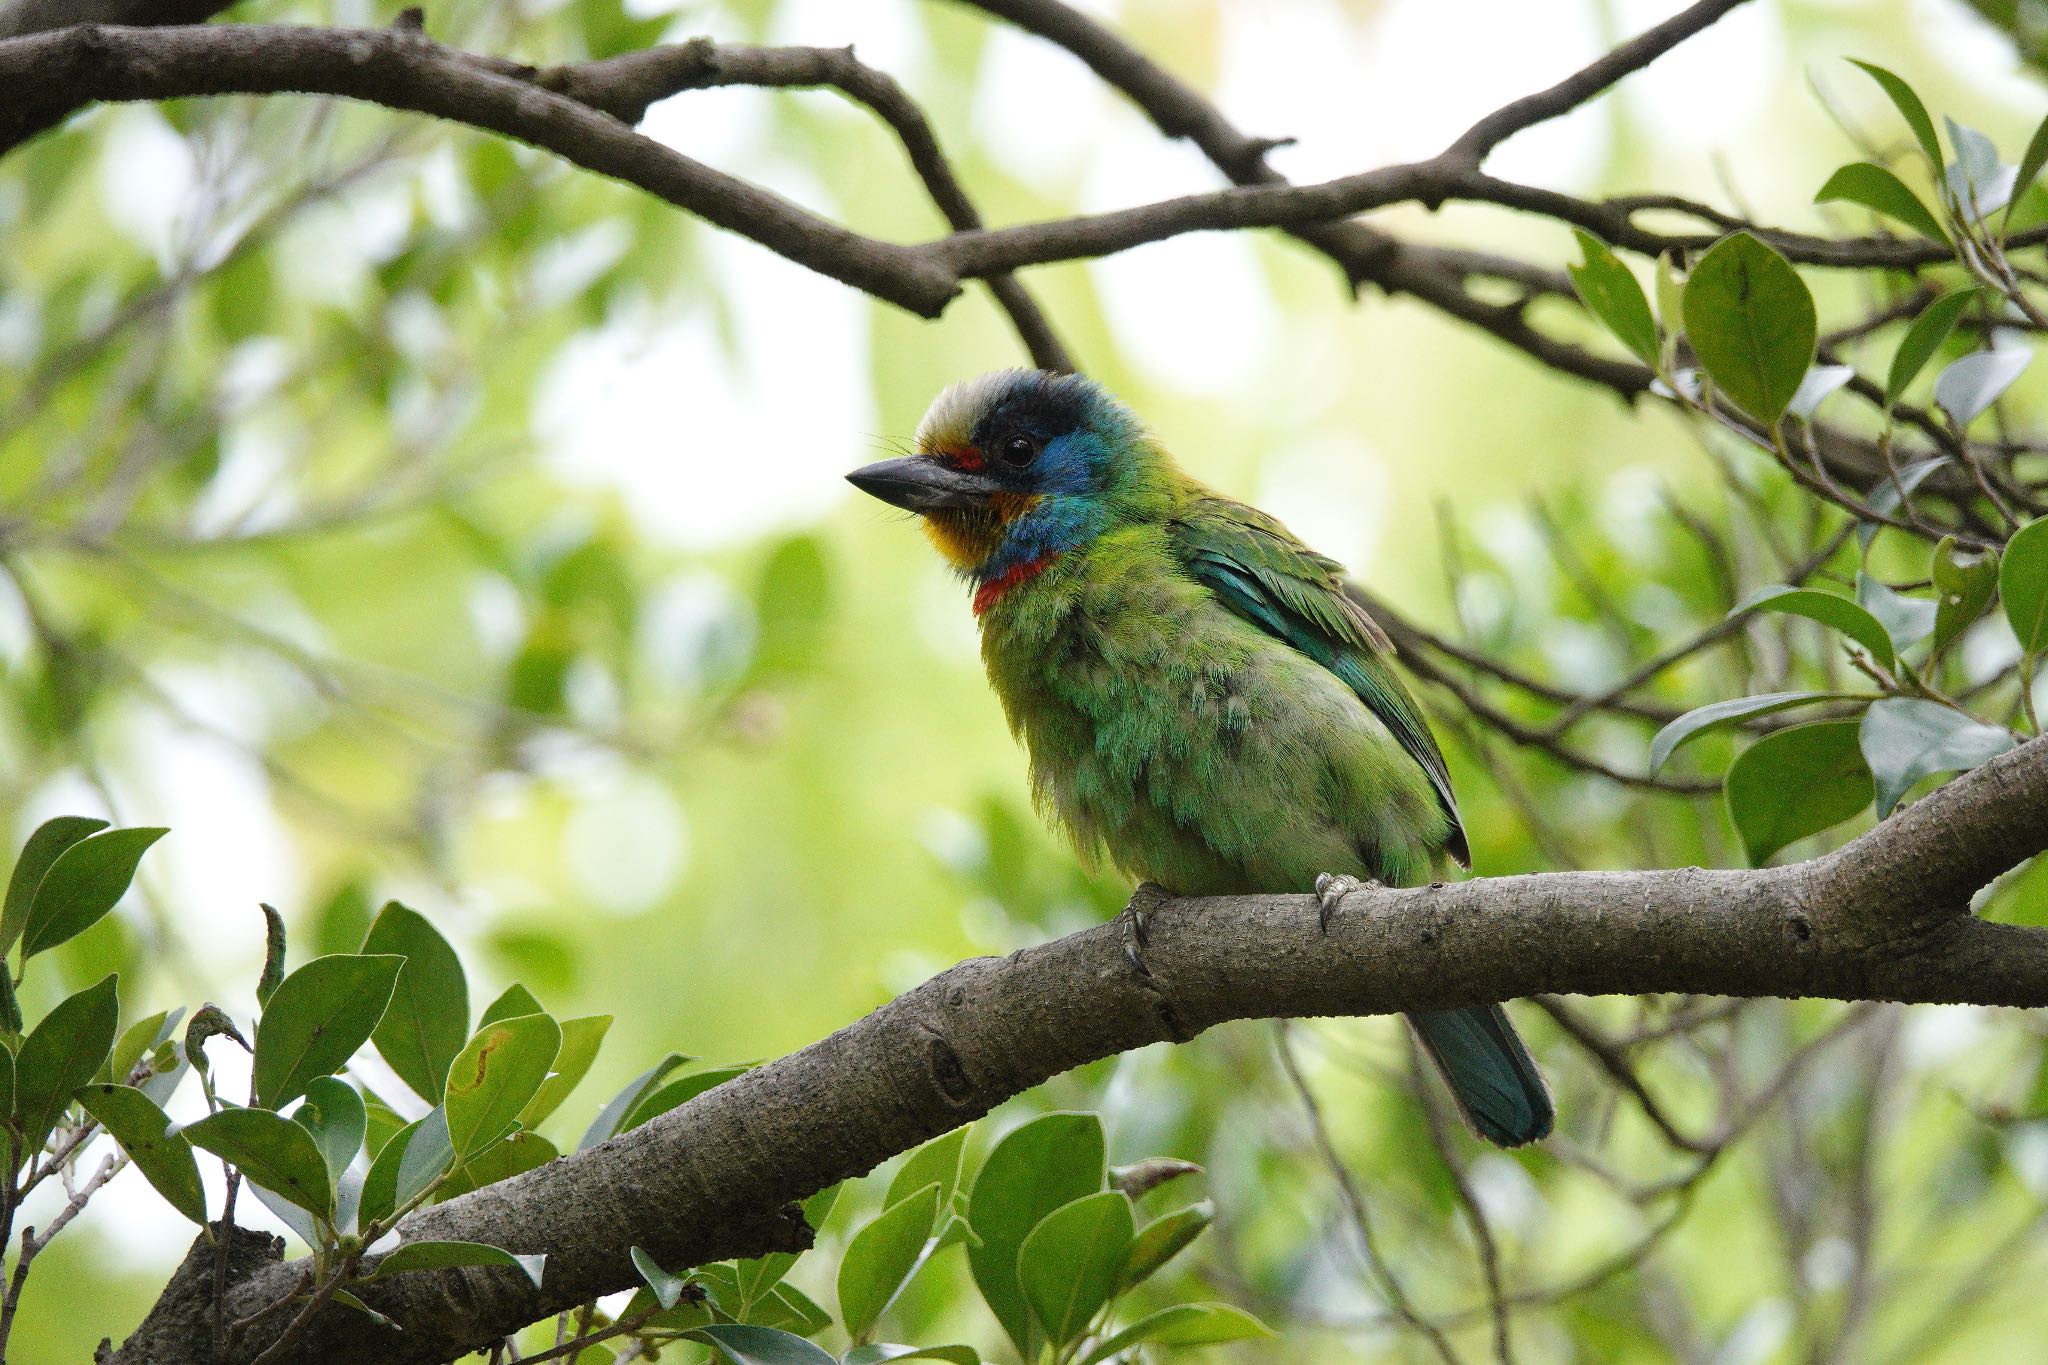 Photo of Taiwan Barbet at 大安森林公園 by のどか